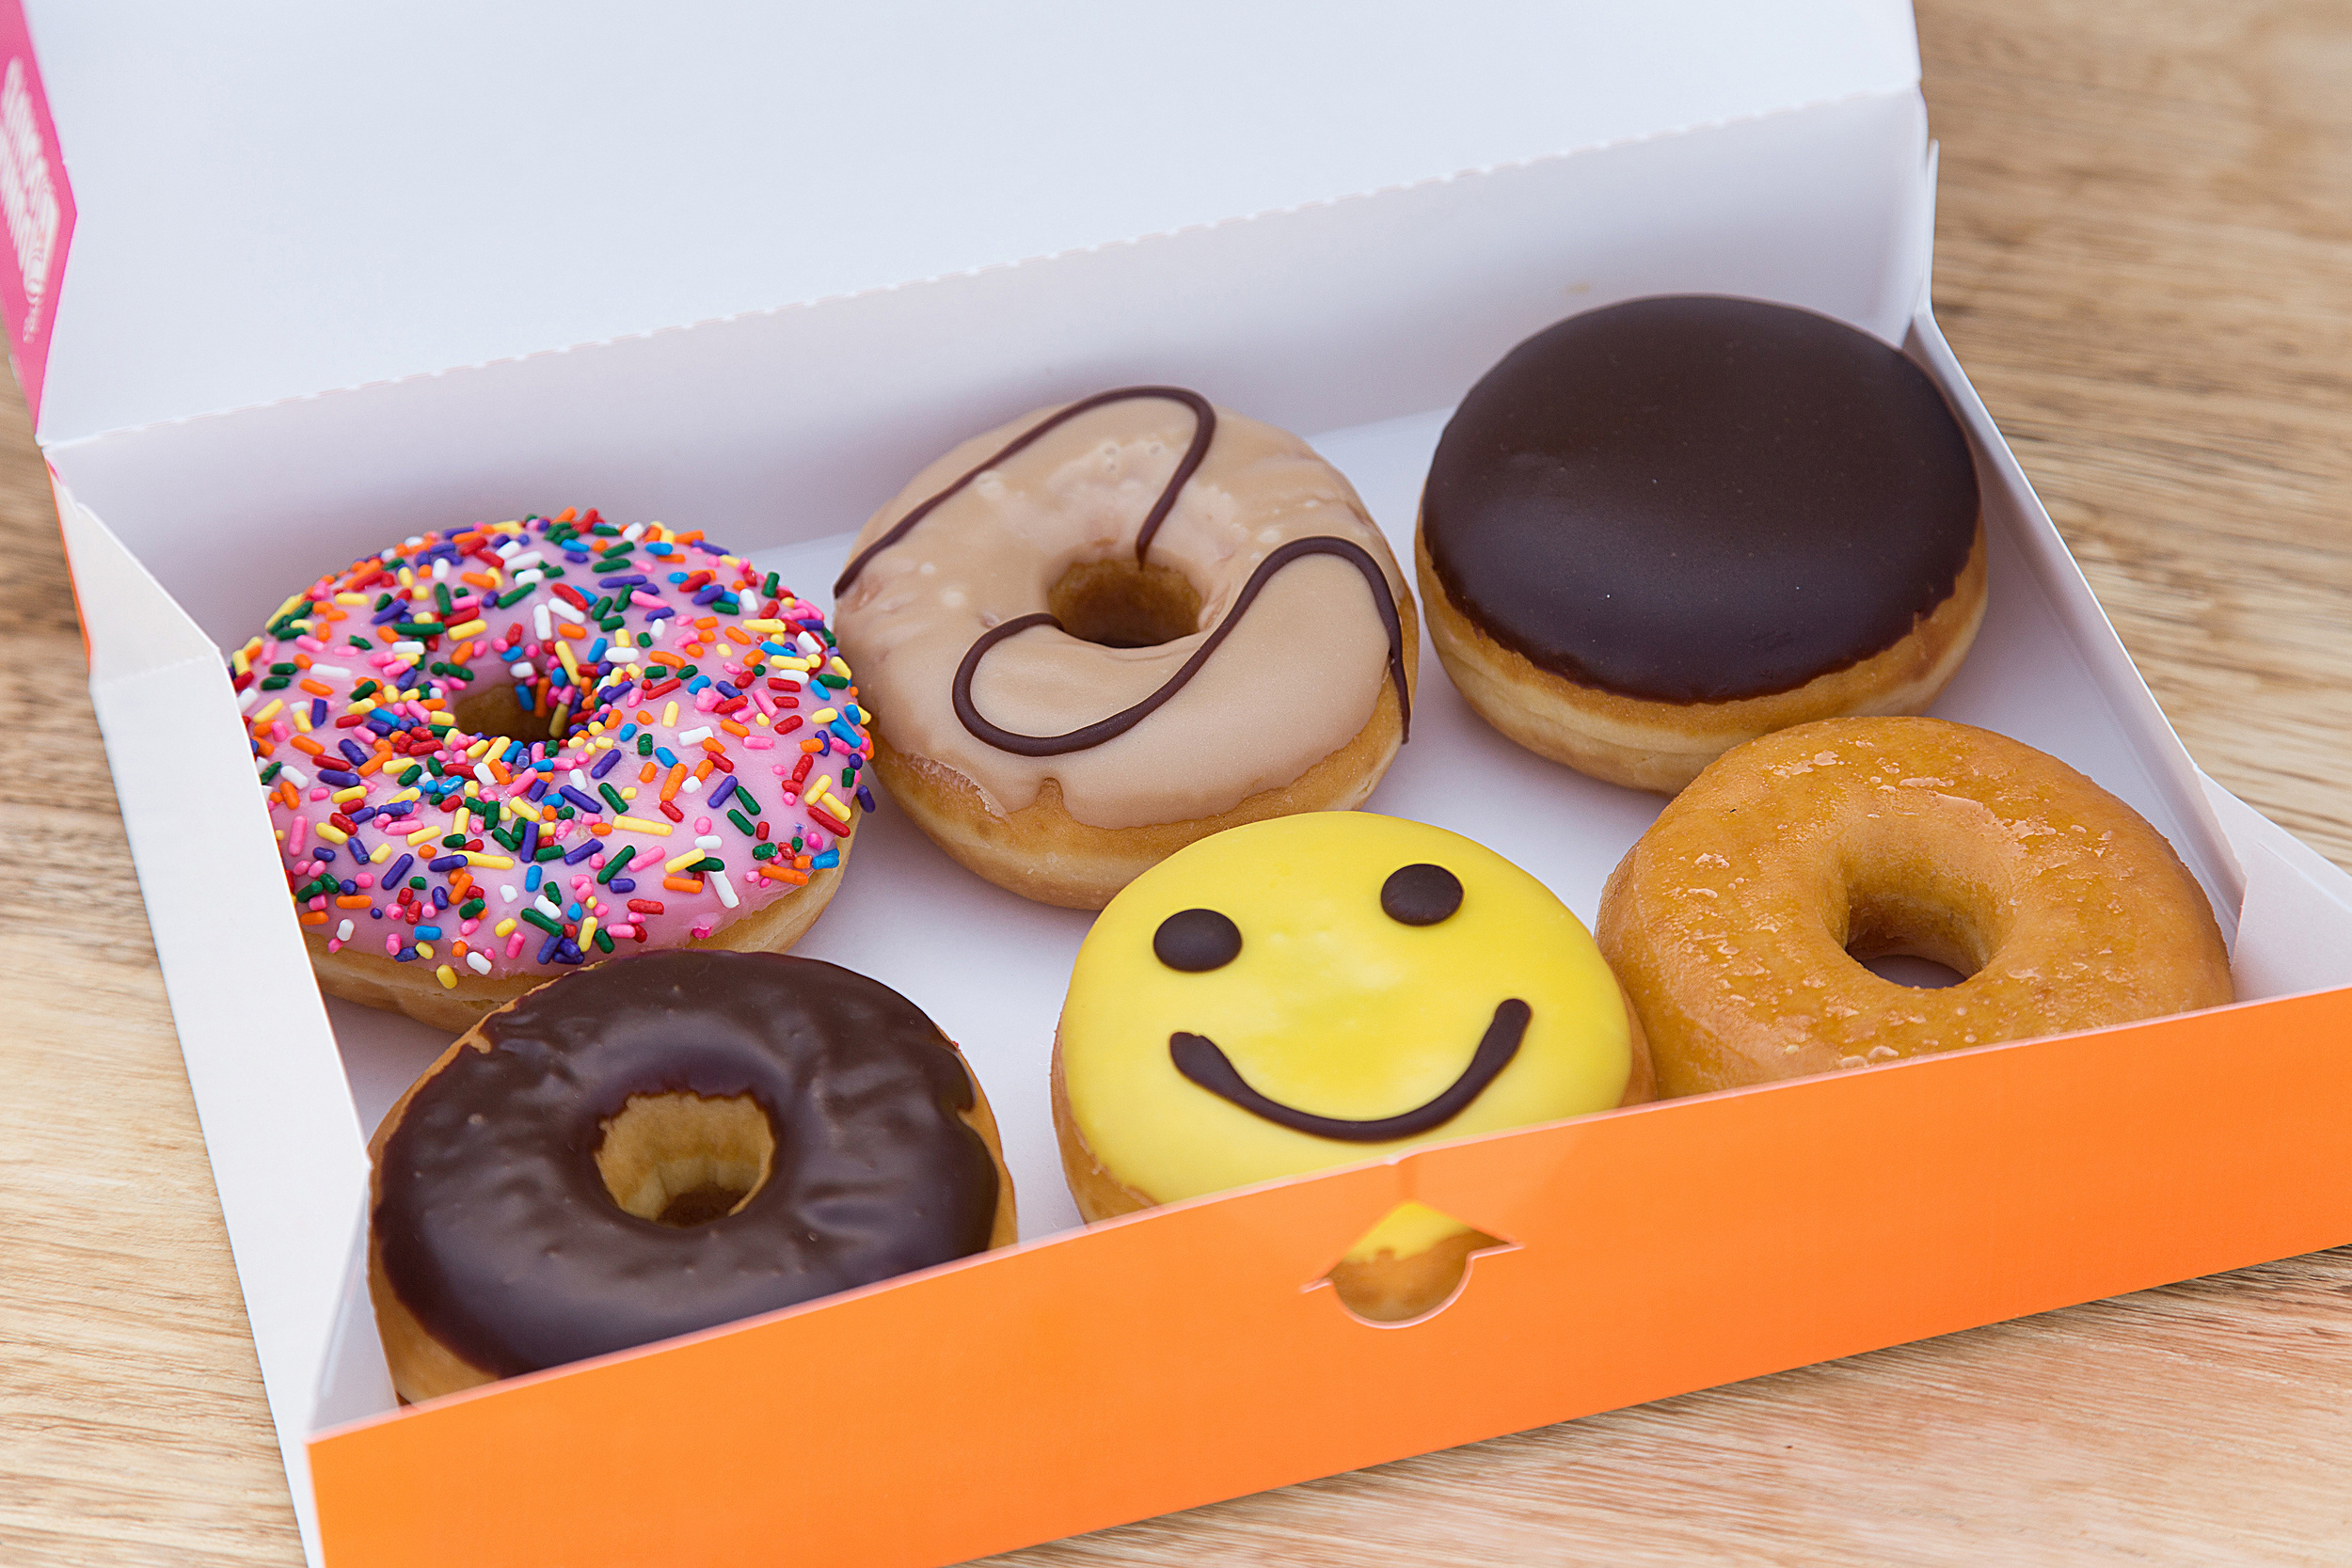 <p>Dunkin’ made a major change to its donuts in 2018 when the company announced it would remove artificial dyes and colors from its ingredient list by the end of the year. Dunkin’ accomplished this goal in record time, eliminating the artificial ingredients in the very first month of 2018! There was no change to the appearance or taste of these treats, so most customers didn’t even notice the switch.</p><p><a href='https://www.msn.com/en-us/community/channel/vid-cj9pqbr0vn9in2b6ddcd8sfgpfq6x6utp44fssrv6mc2gtybw0us'>Follow us on MSN to see more of our exclusive lifestyle content.</a></p>